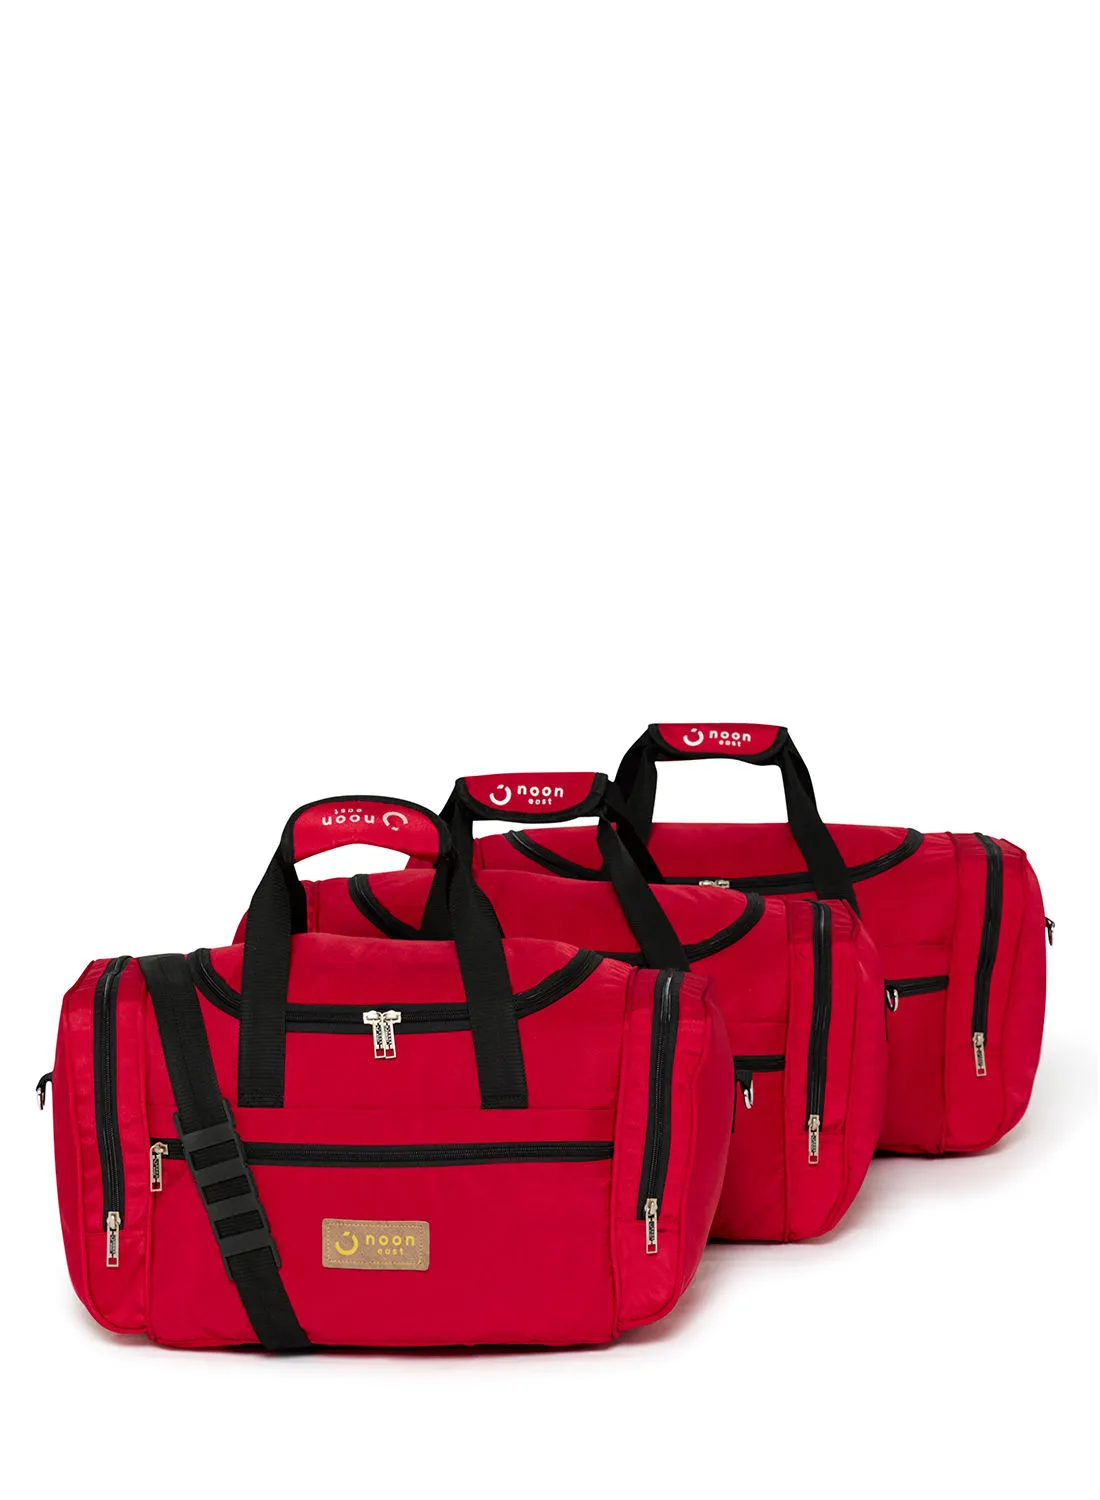 Noon East 3-Piece Lightweight Waterproof Polyester Multipurpose Luggage Duffle Bag/Gym Bag Set 20/22/24 Inch Red